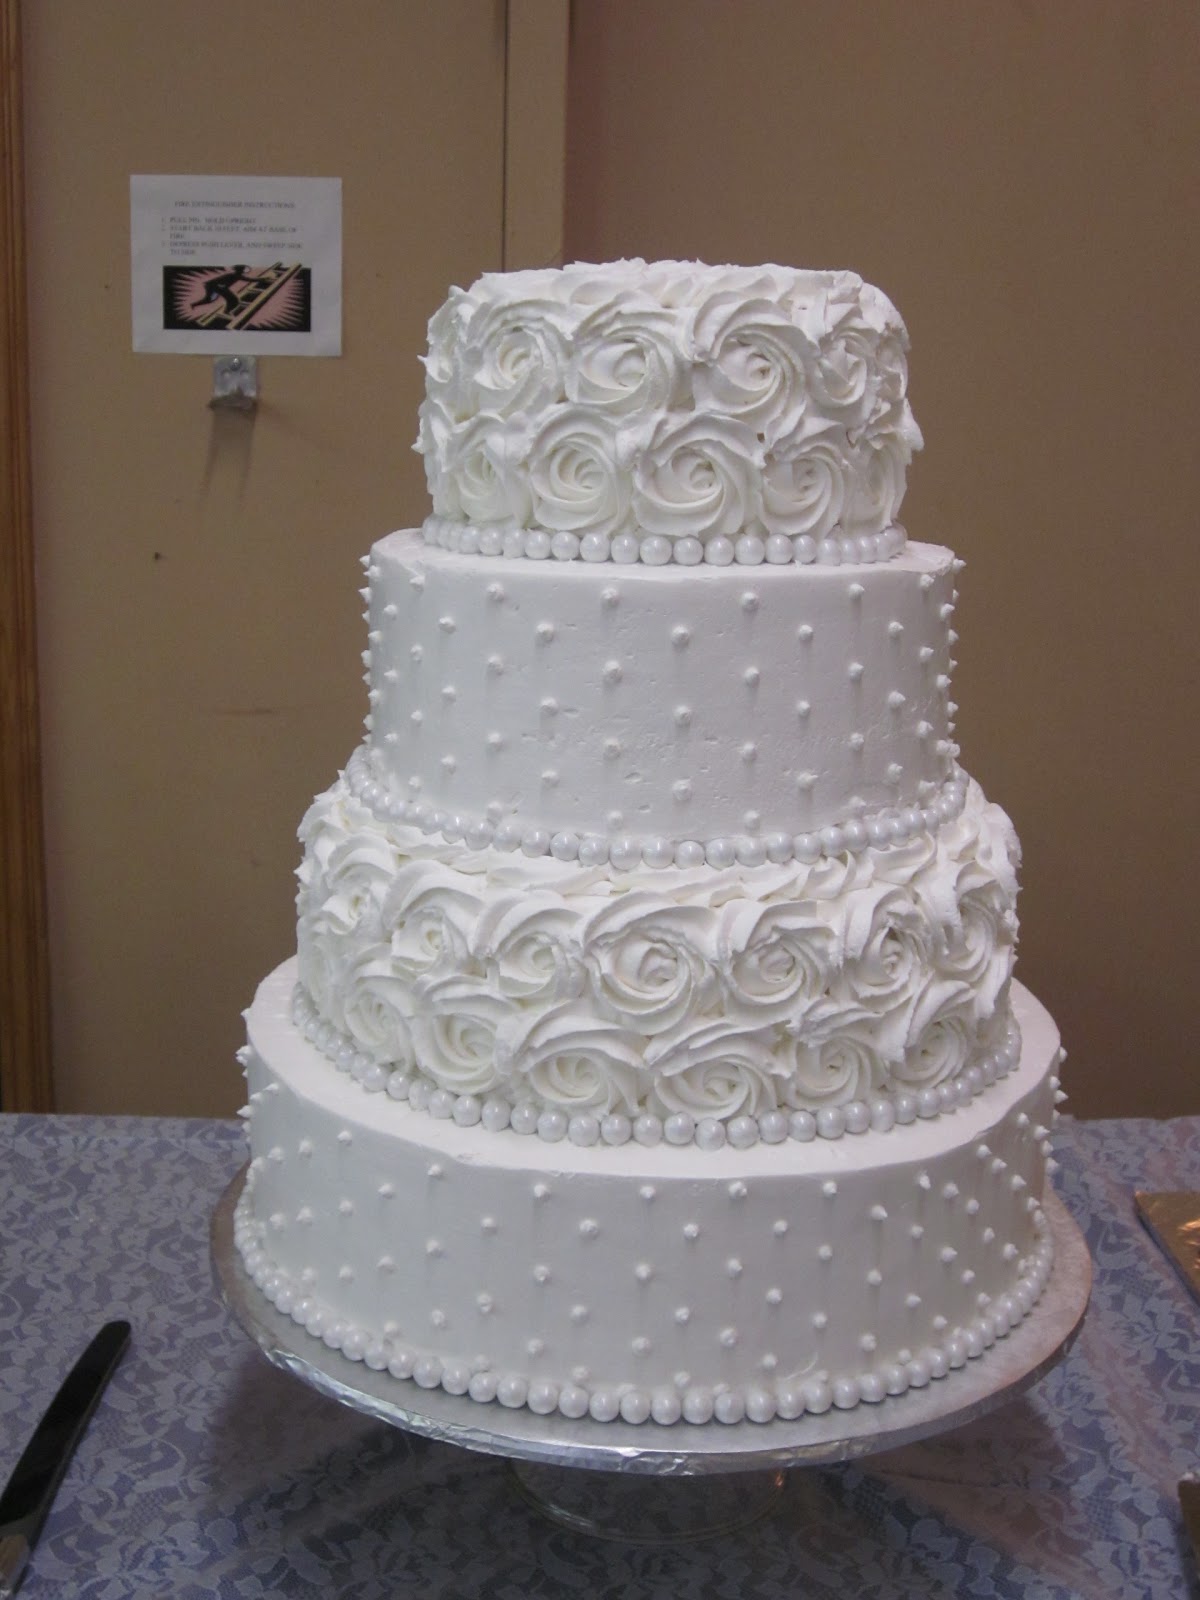  whipped  cream icing  for wedding  cakes 